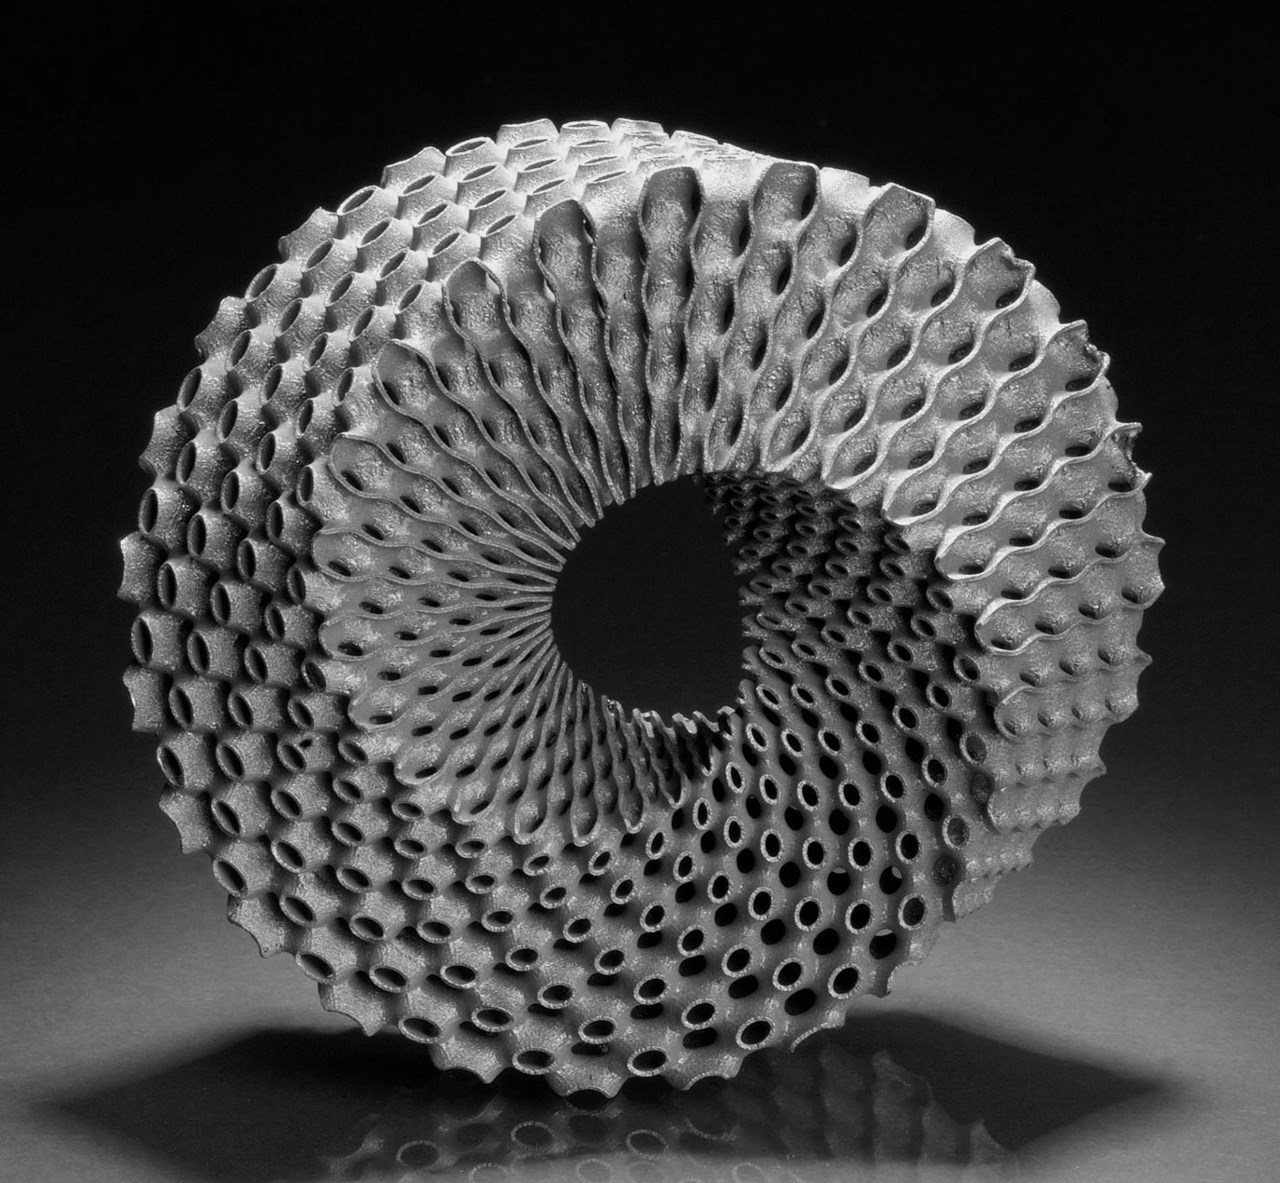 additive-manufacturing-in-fp7-and-horizon-2020